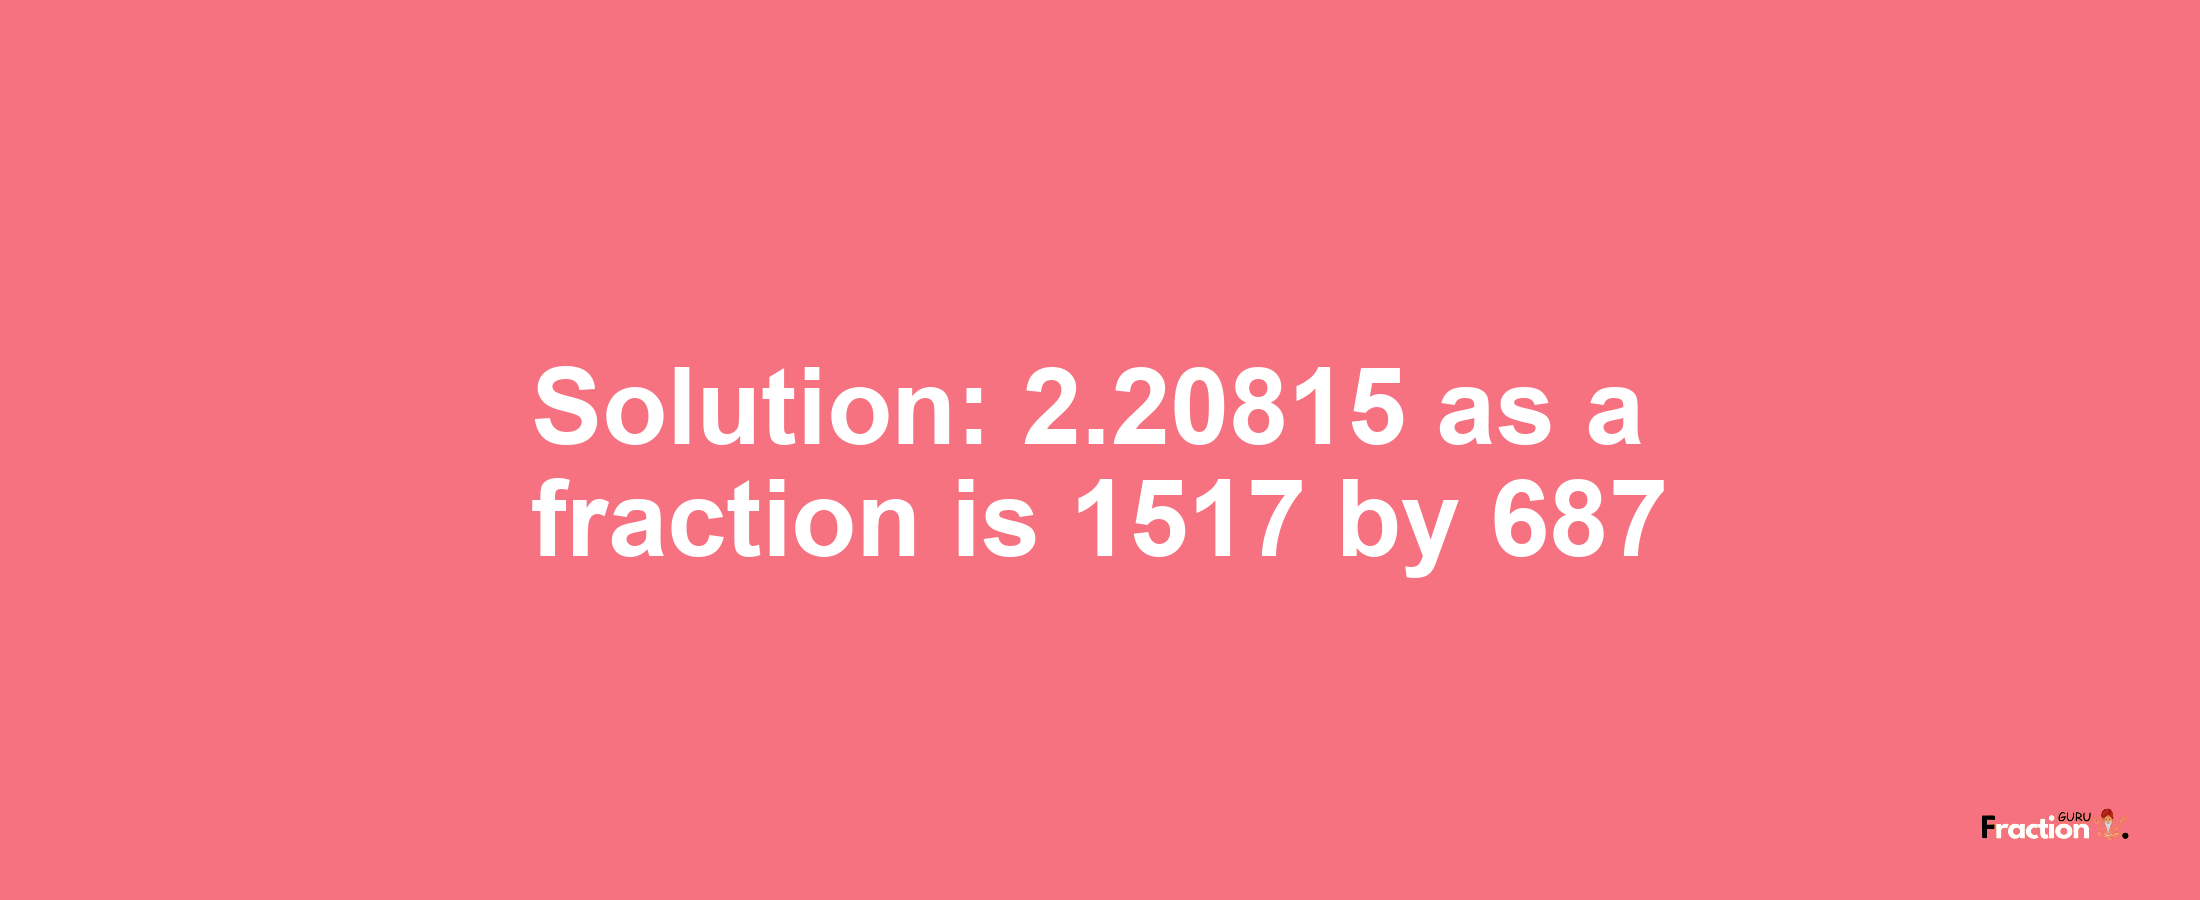 Solution:2.20815 as a fraction is 1517/687